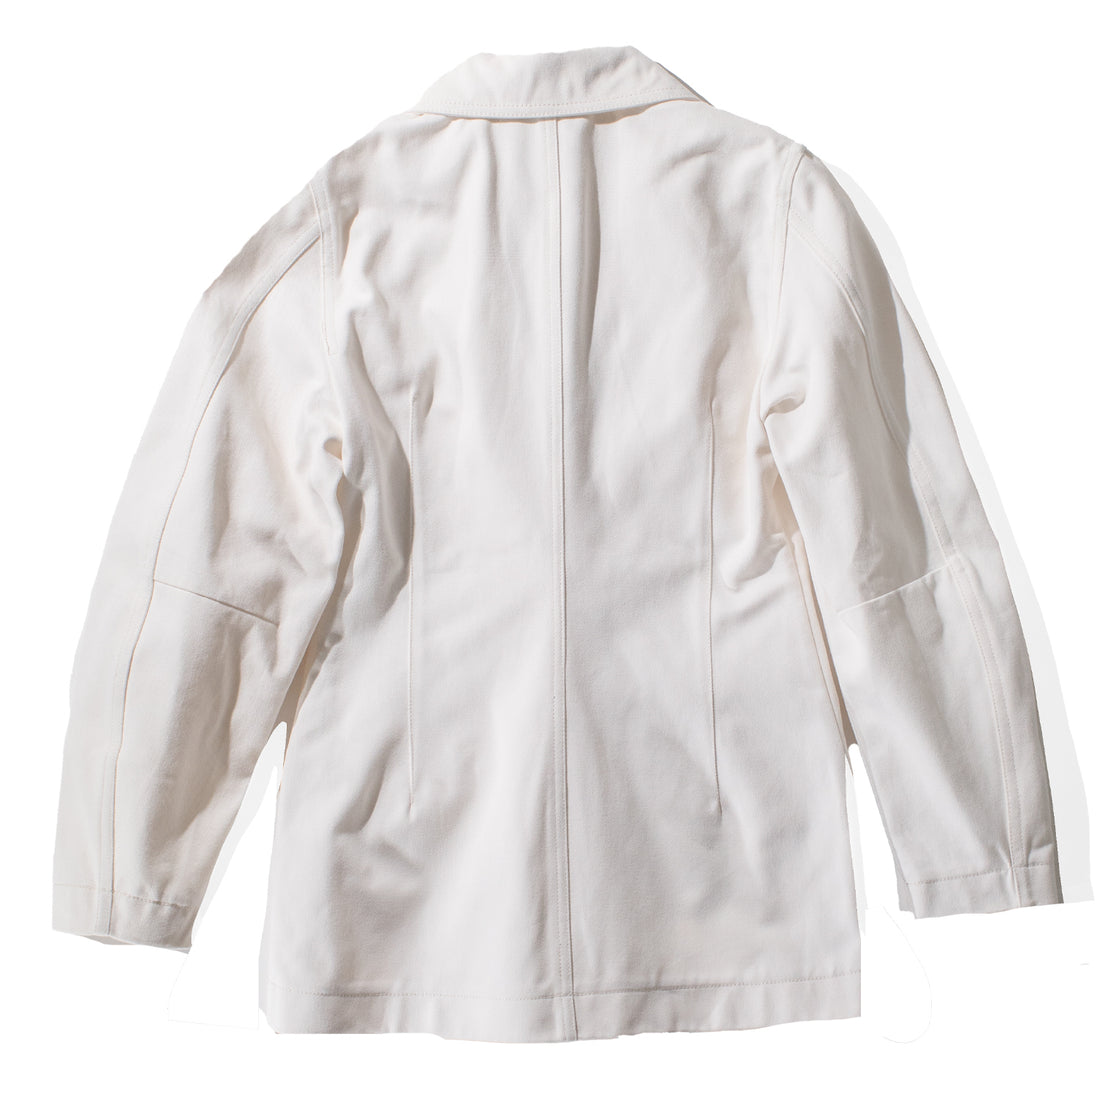 Rodebjer Caria Cotton Blazer in Canvas